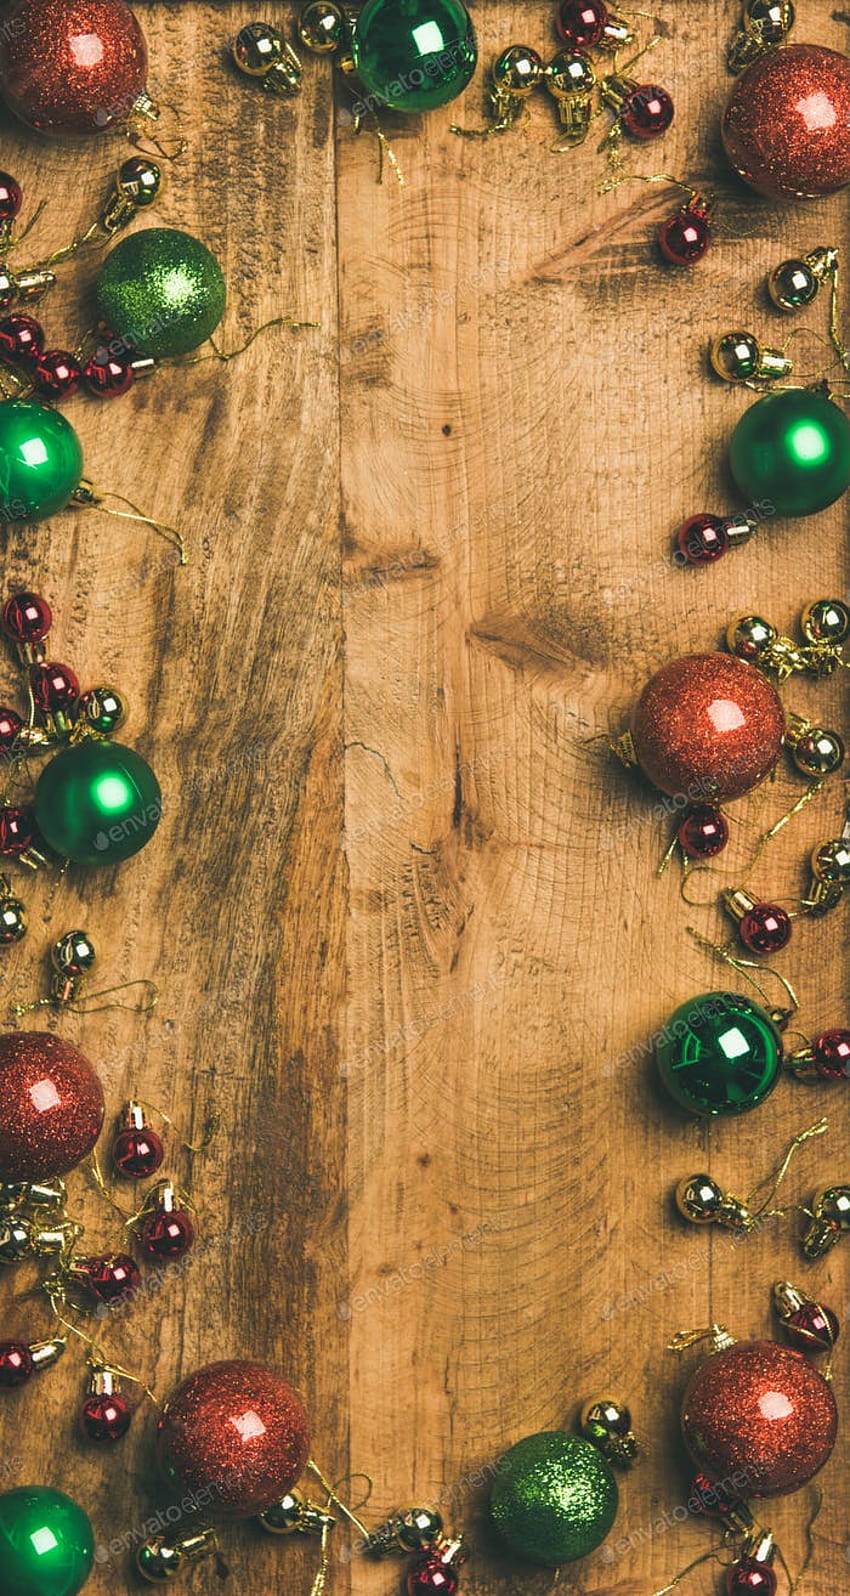 Christmas tree decoration balls on wooden background, vertical composition by sonyakamoz on Envato Elements, christmas wood vertical HD phone wallpaper